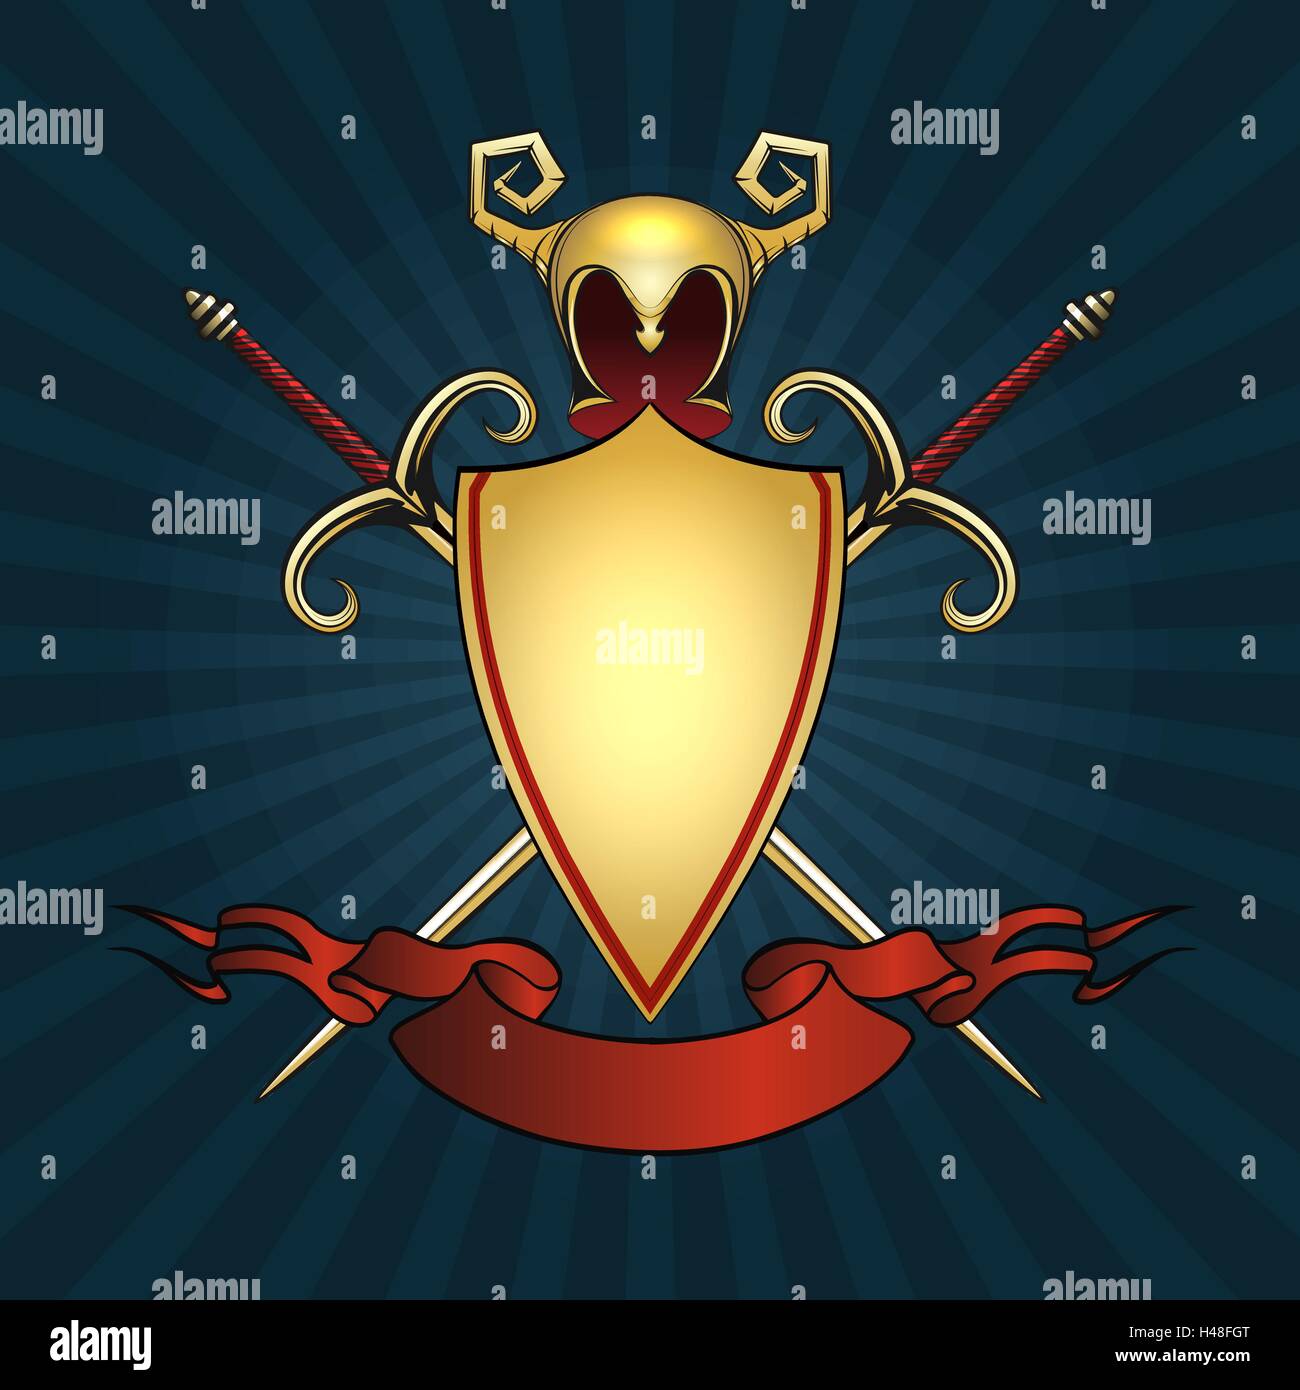 Helmet with Horns with Golden shield, two swords and red banner for text. Coat of arms drawn in classic style. Stock Vector